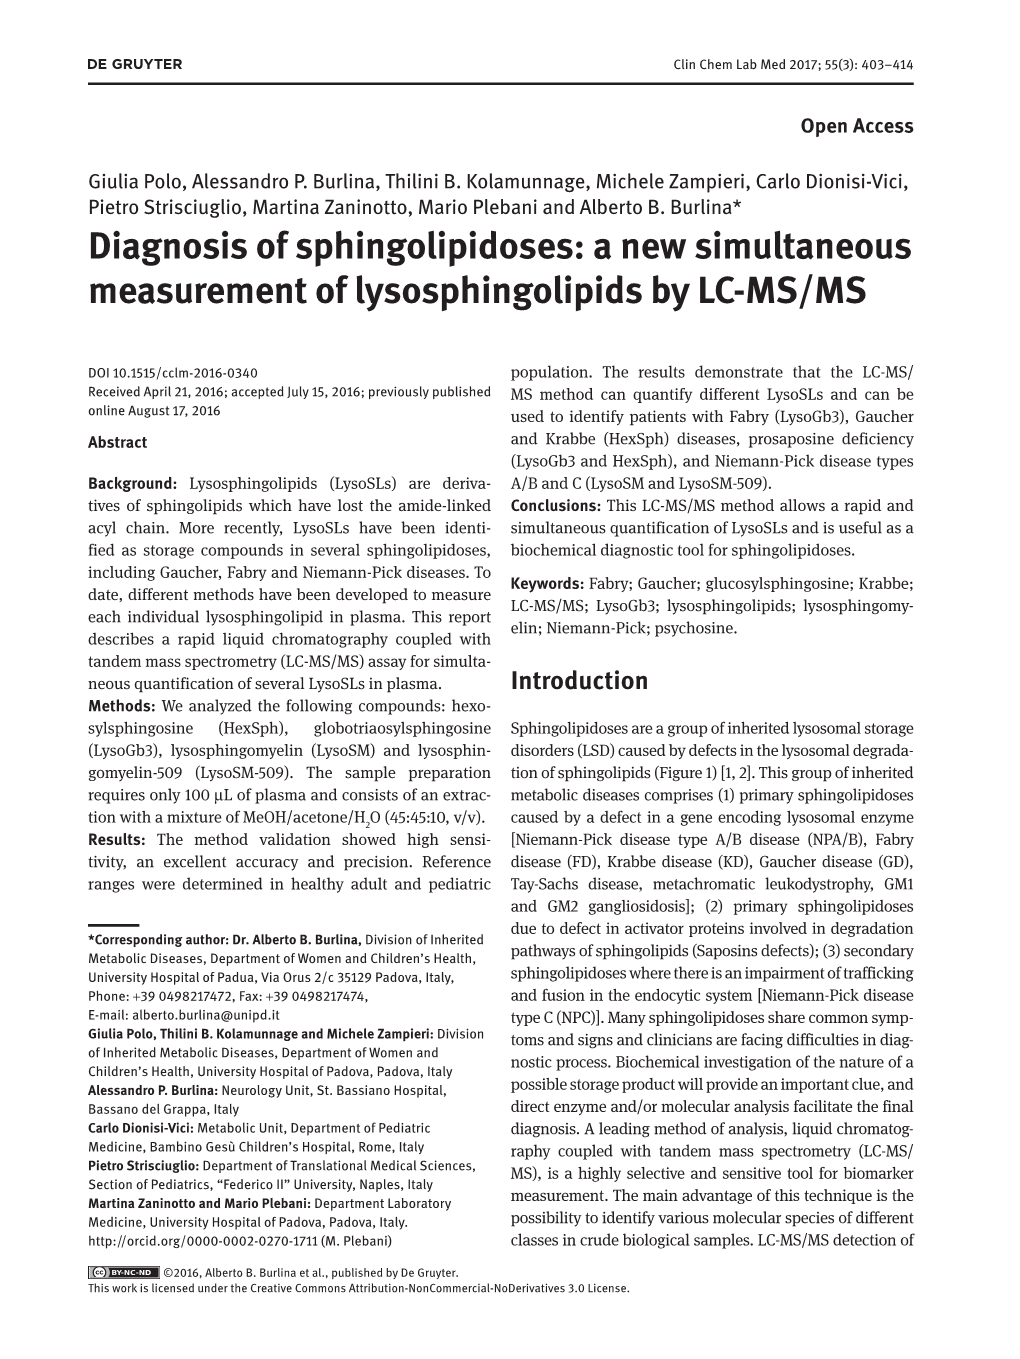 A New Simultaneous Measurement of Lysosphingolipids by LC-MS/MS